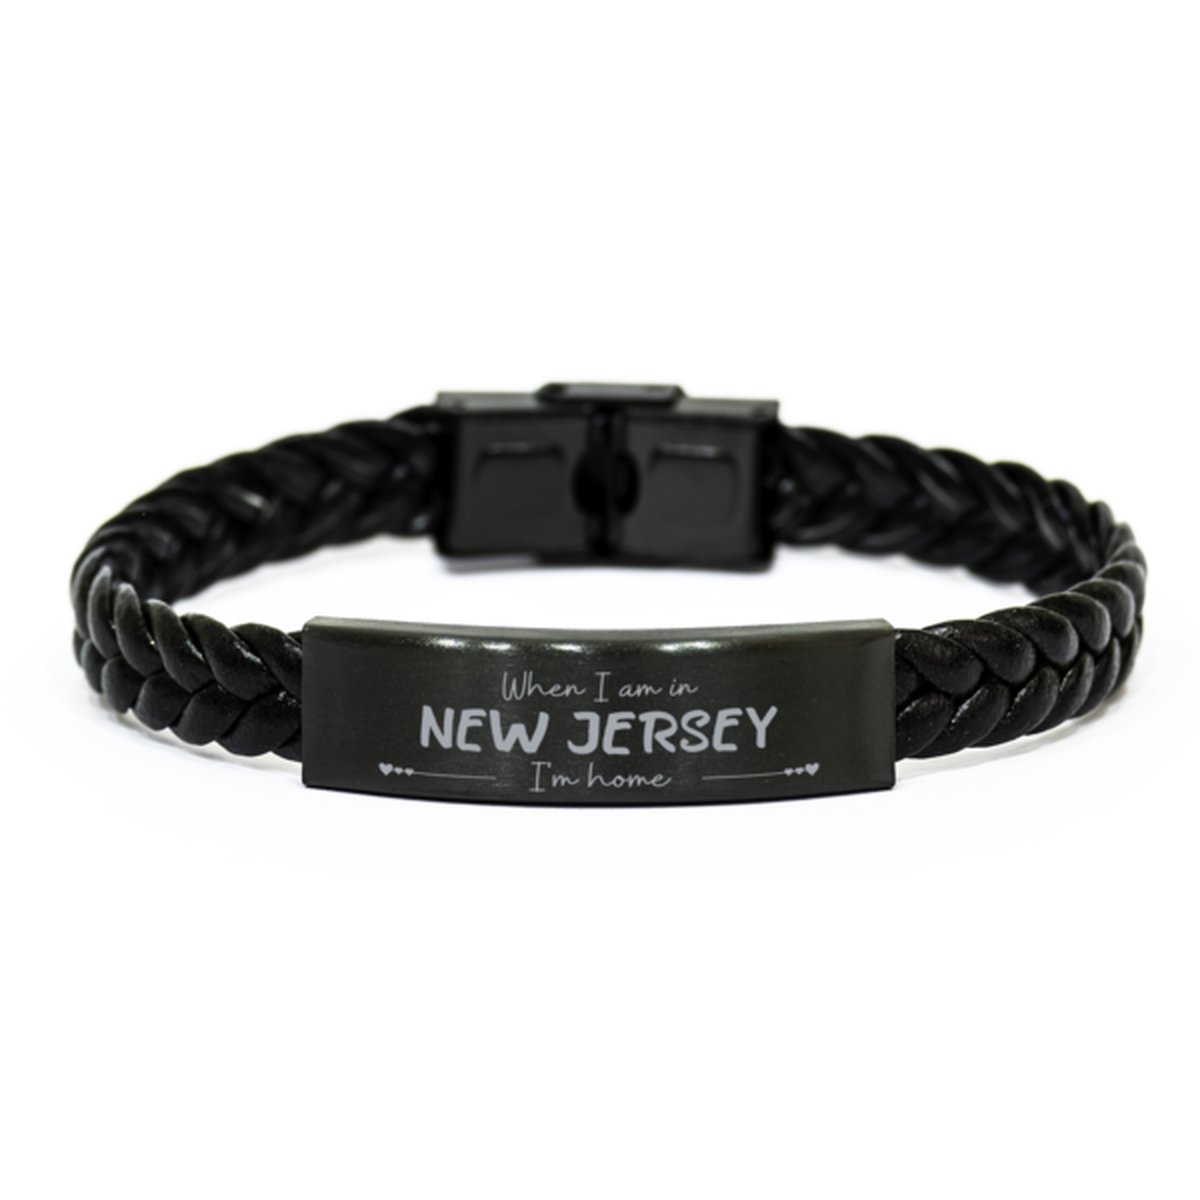 When I am in New Jersey I'm home Braided Leather Bracelet, Cheap Gifts For New Jersey, State New Jersey Birthday Gifts for Friends Coworker